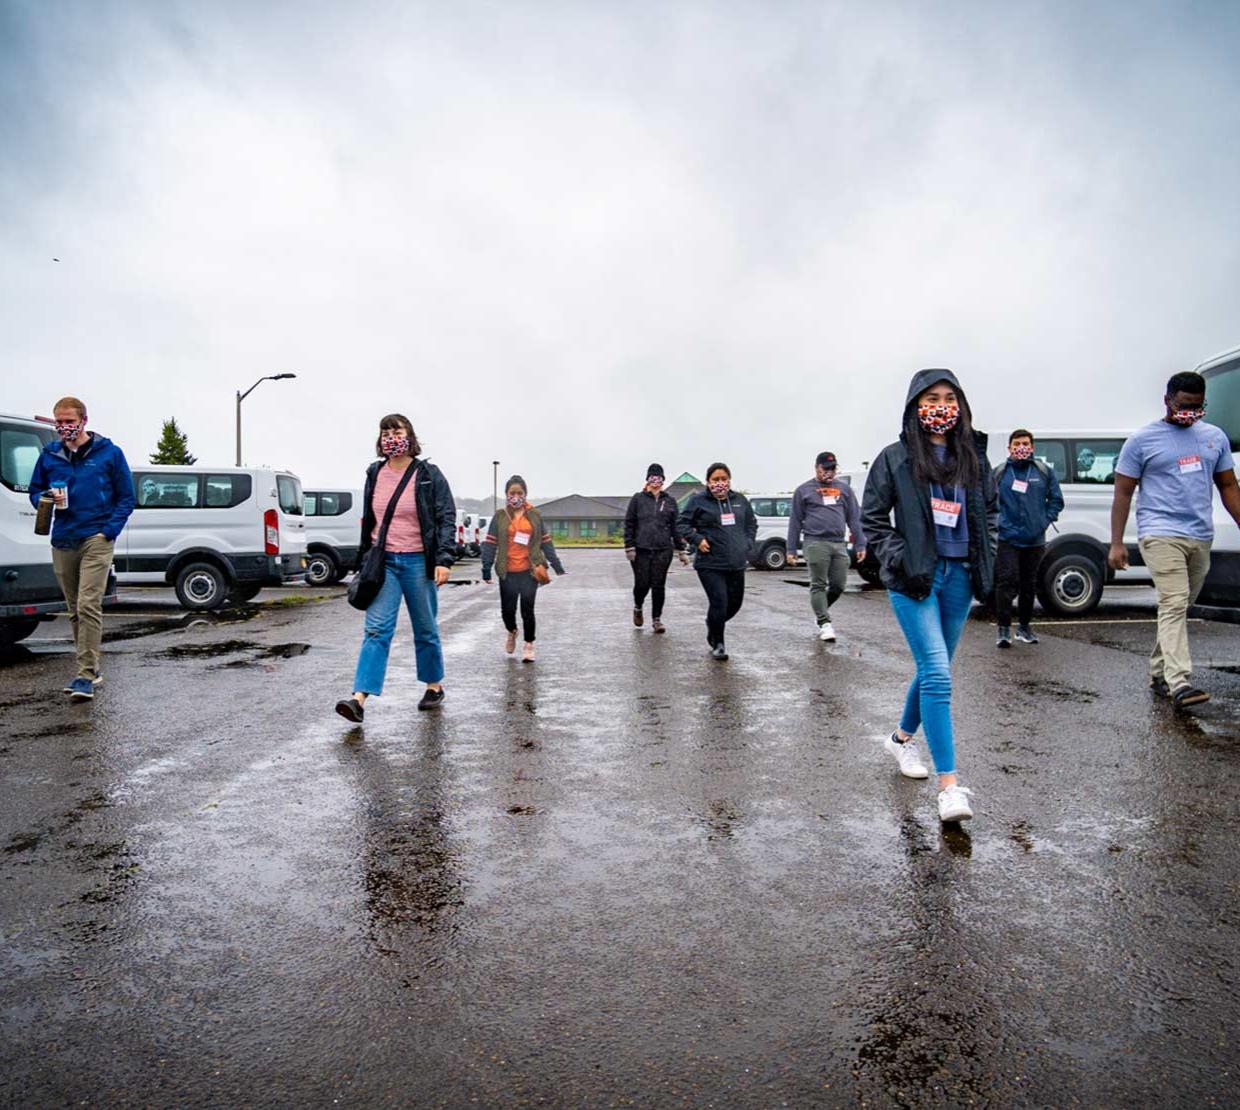 TRACE employees walking in parking lot on a cloudy, wet day in Newport, Oregon